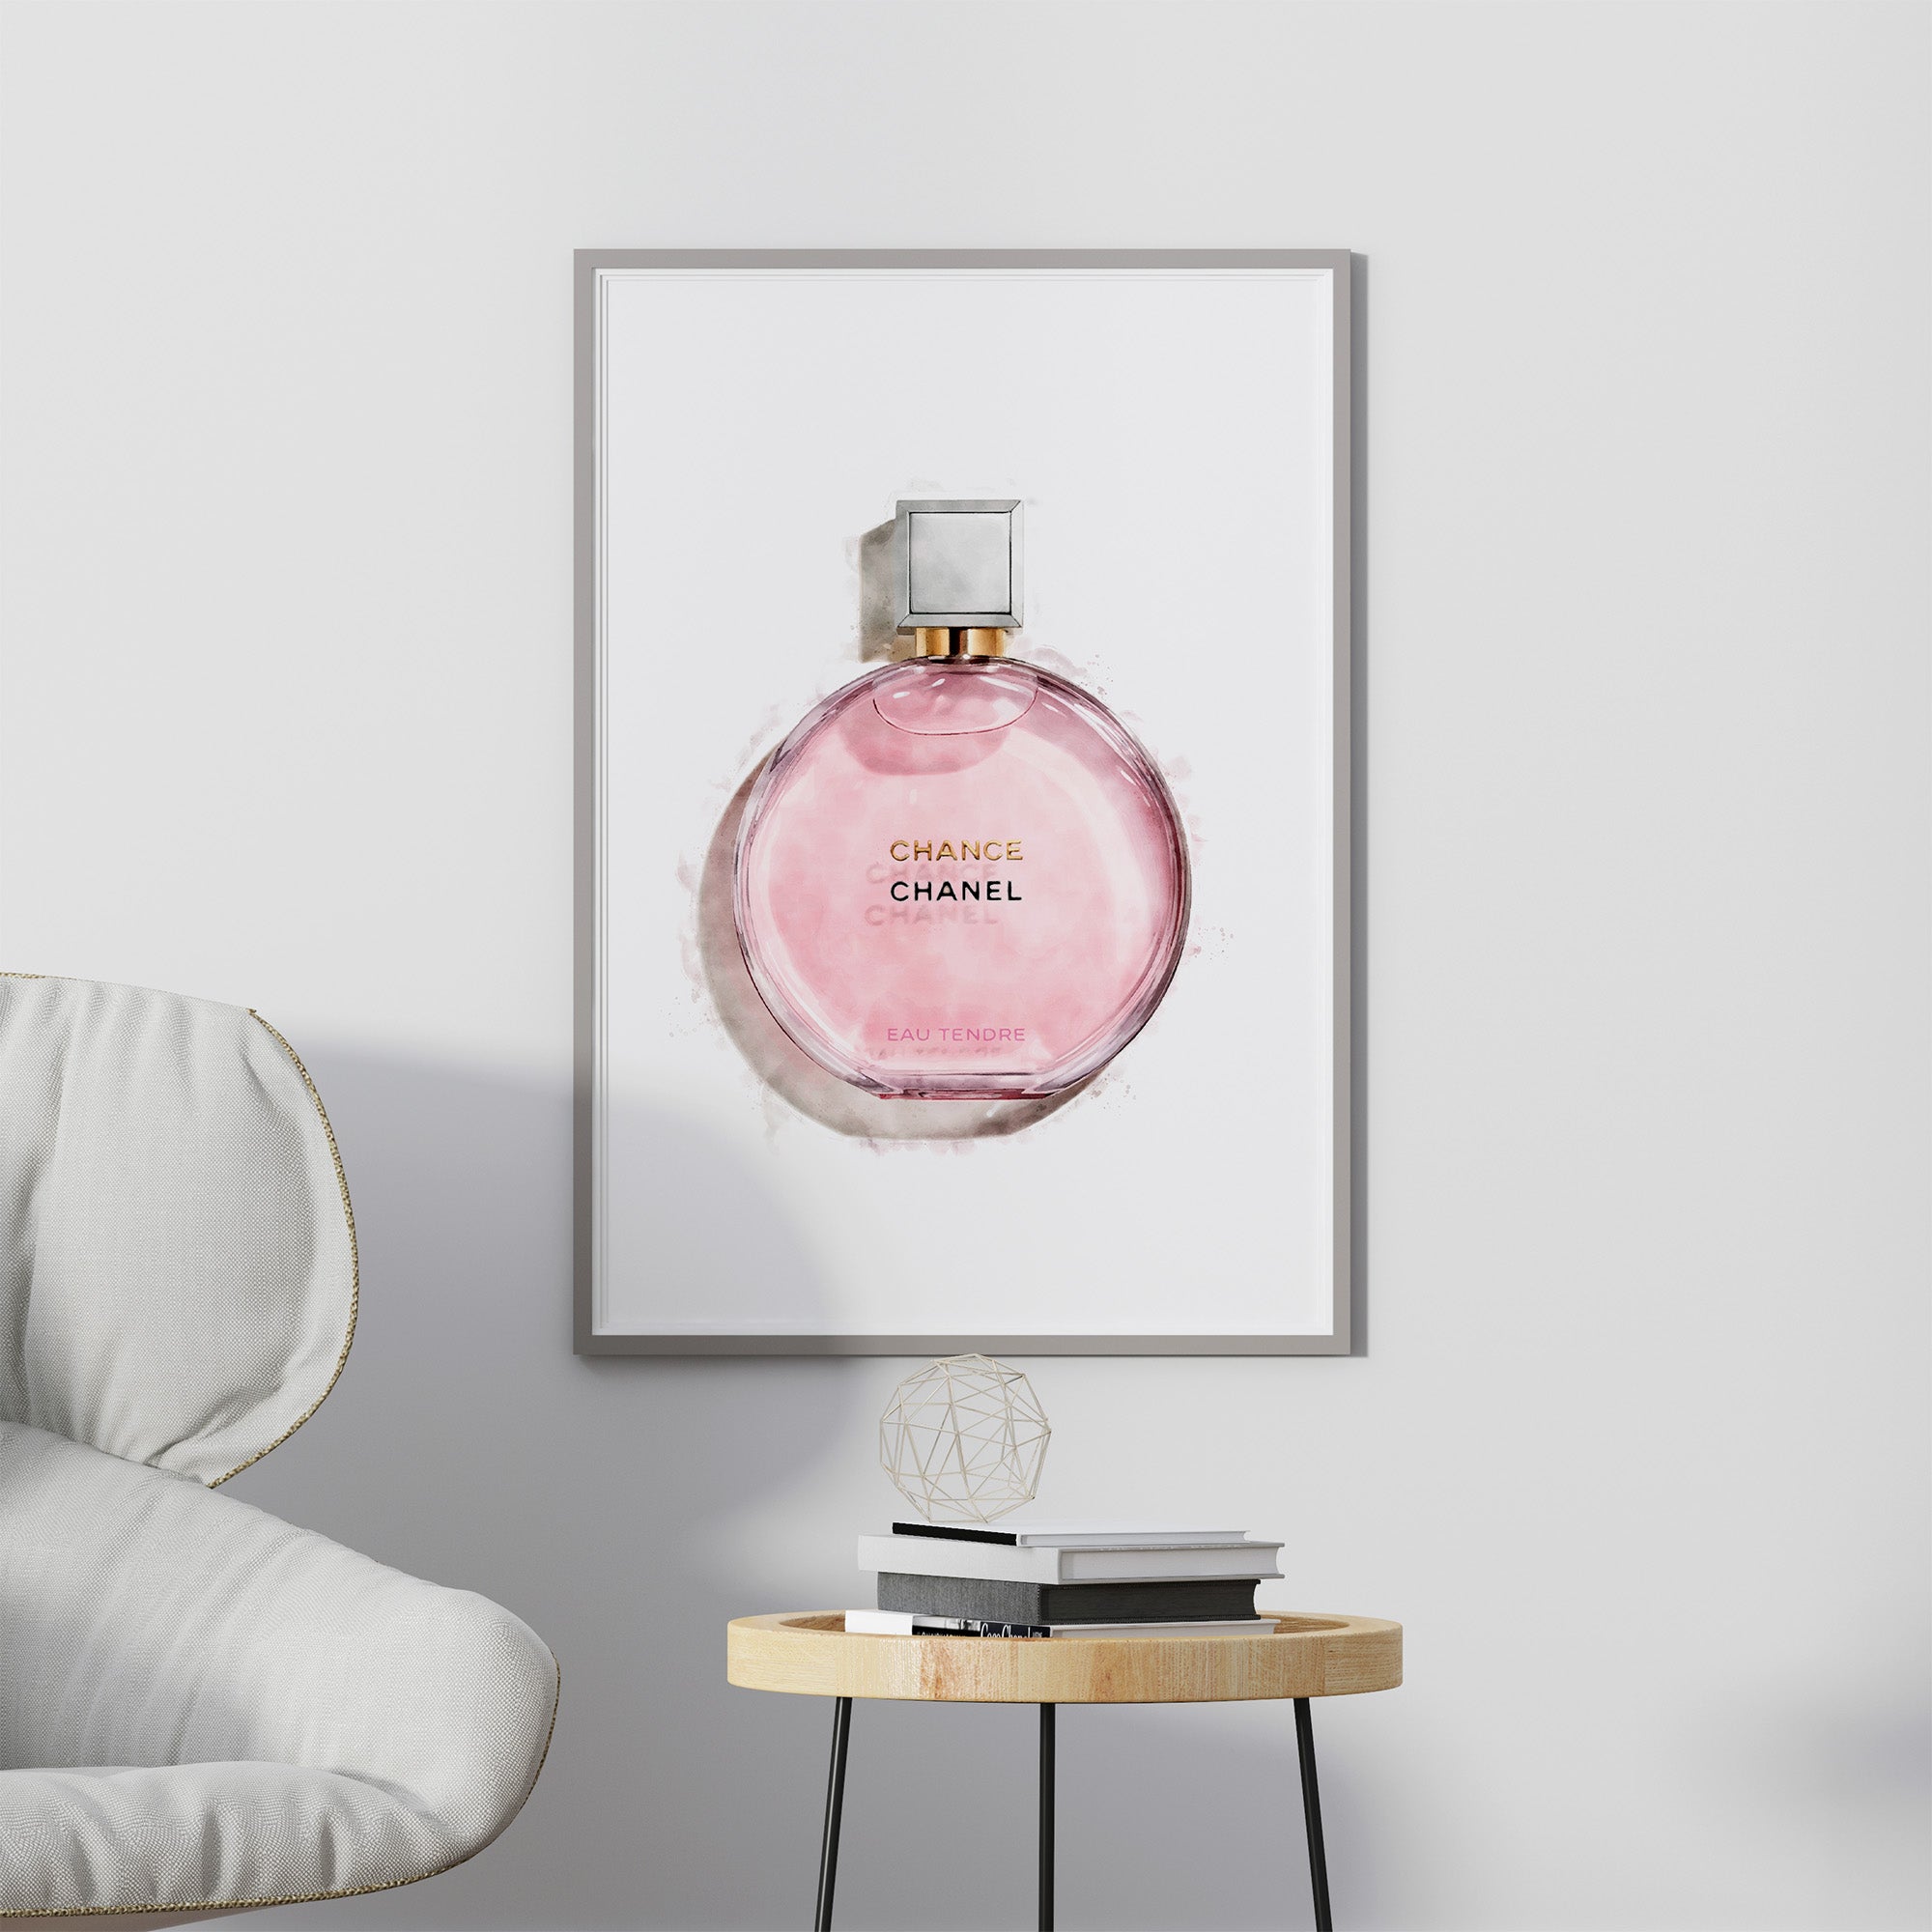 Fashion Floral Glam Perfume Bottle - Framed Print, Size: One Size